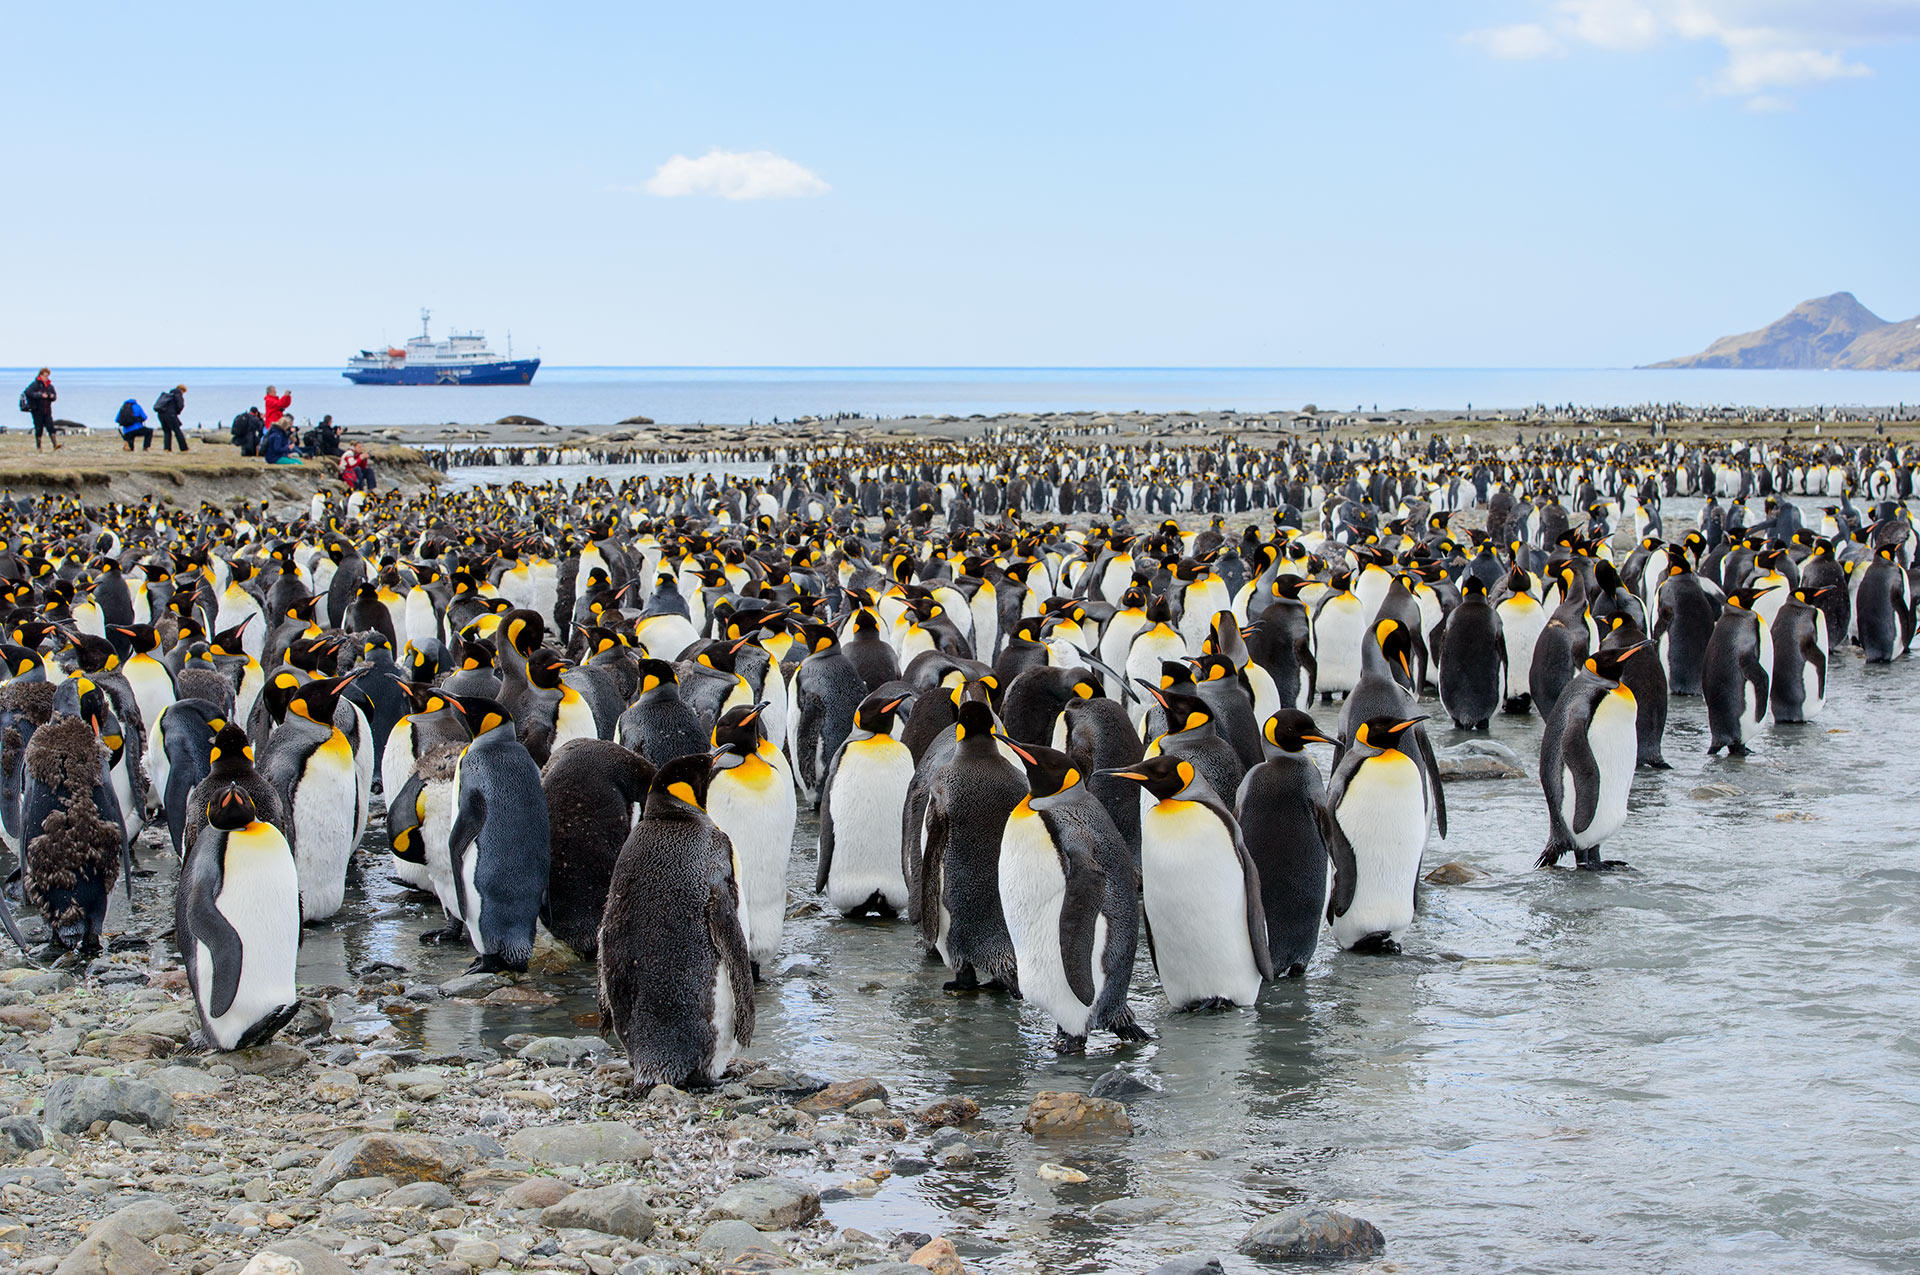 King penguins (Aptenodytes patagonicus) tourists and Oceanwide Expeditions ship Plancius, on St Andrews Bay, South Georgia